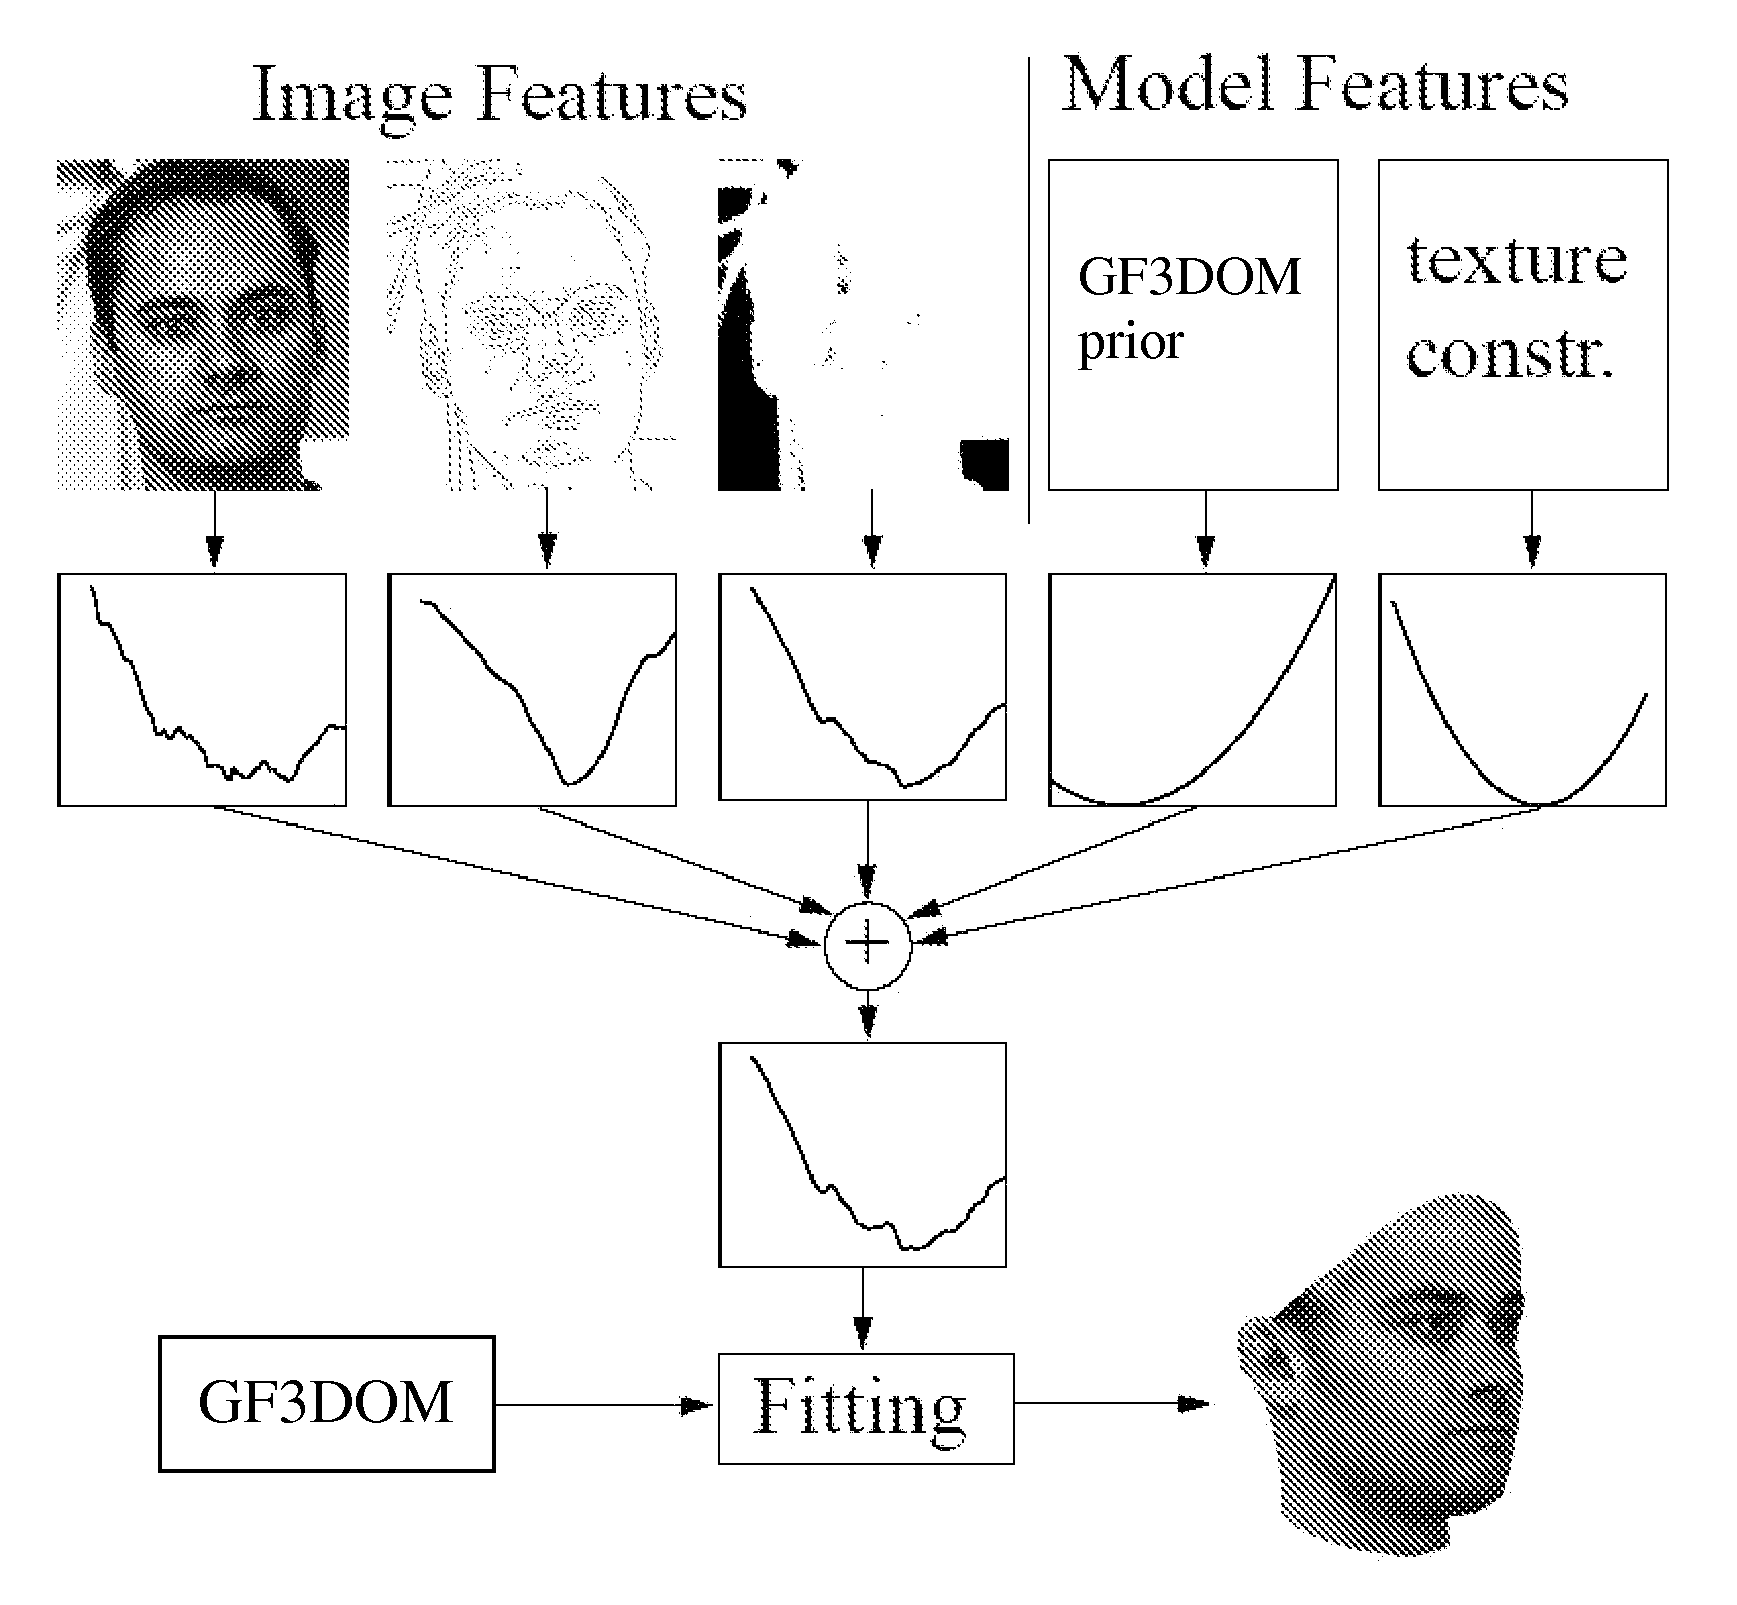 Estimating 3D shape and texture of a 3D object based on a 2d image of the 3D object